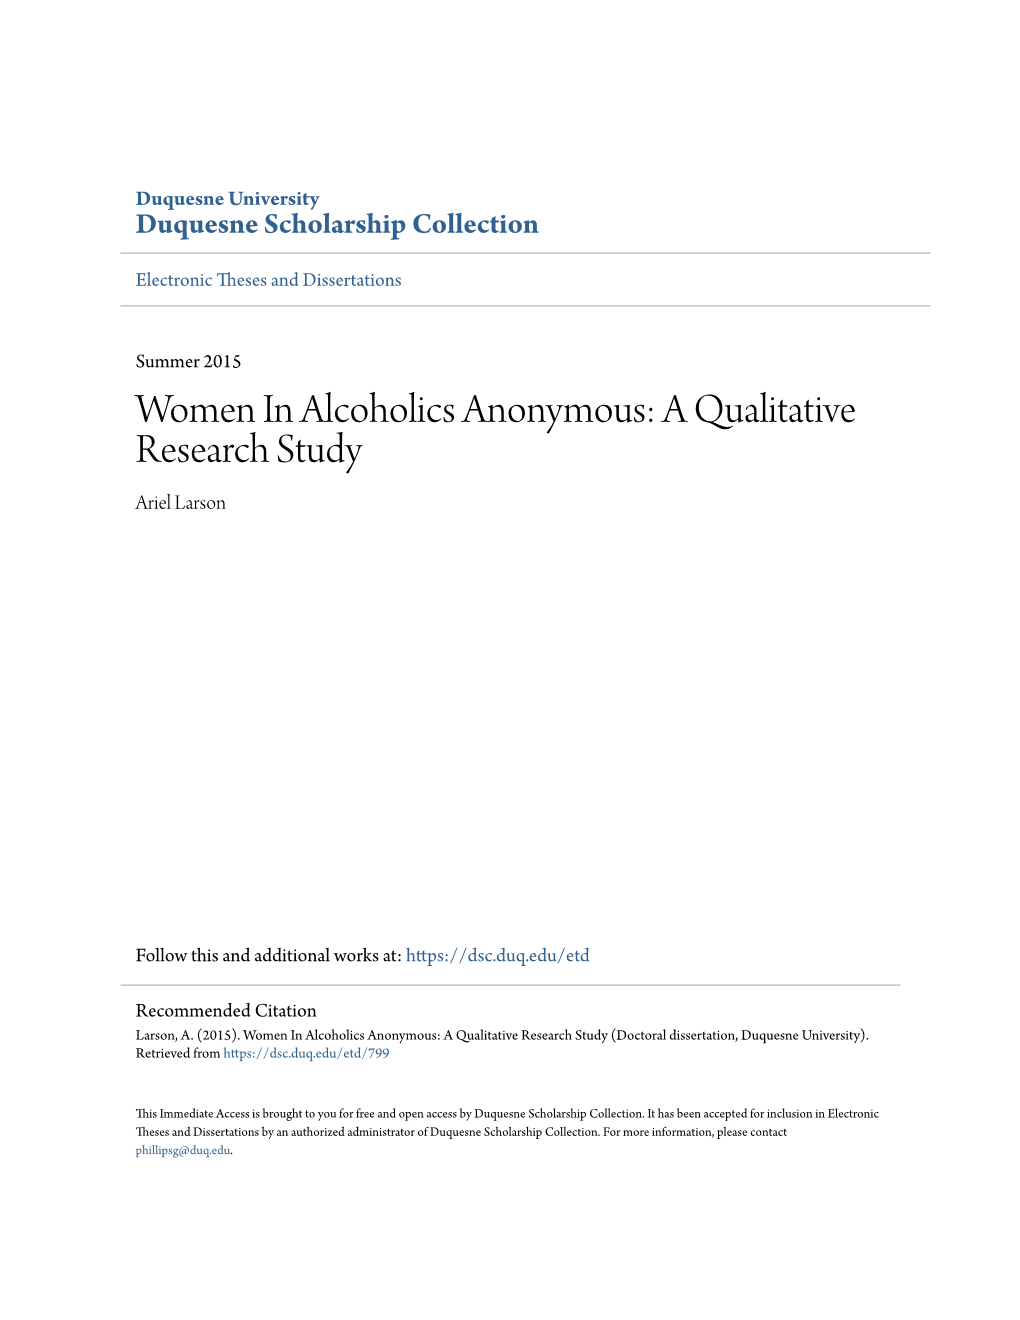 Women in Alcoholics Anonymous: a Qualitative Research Study Ariel Larson